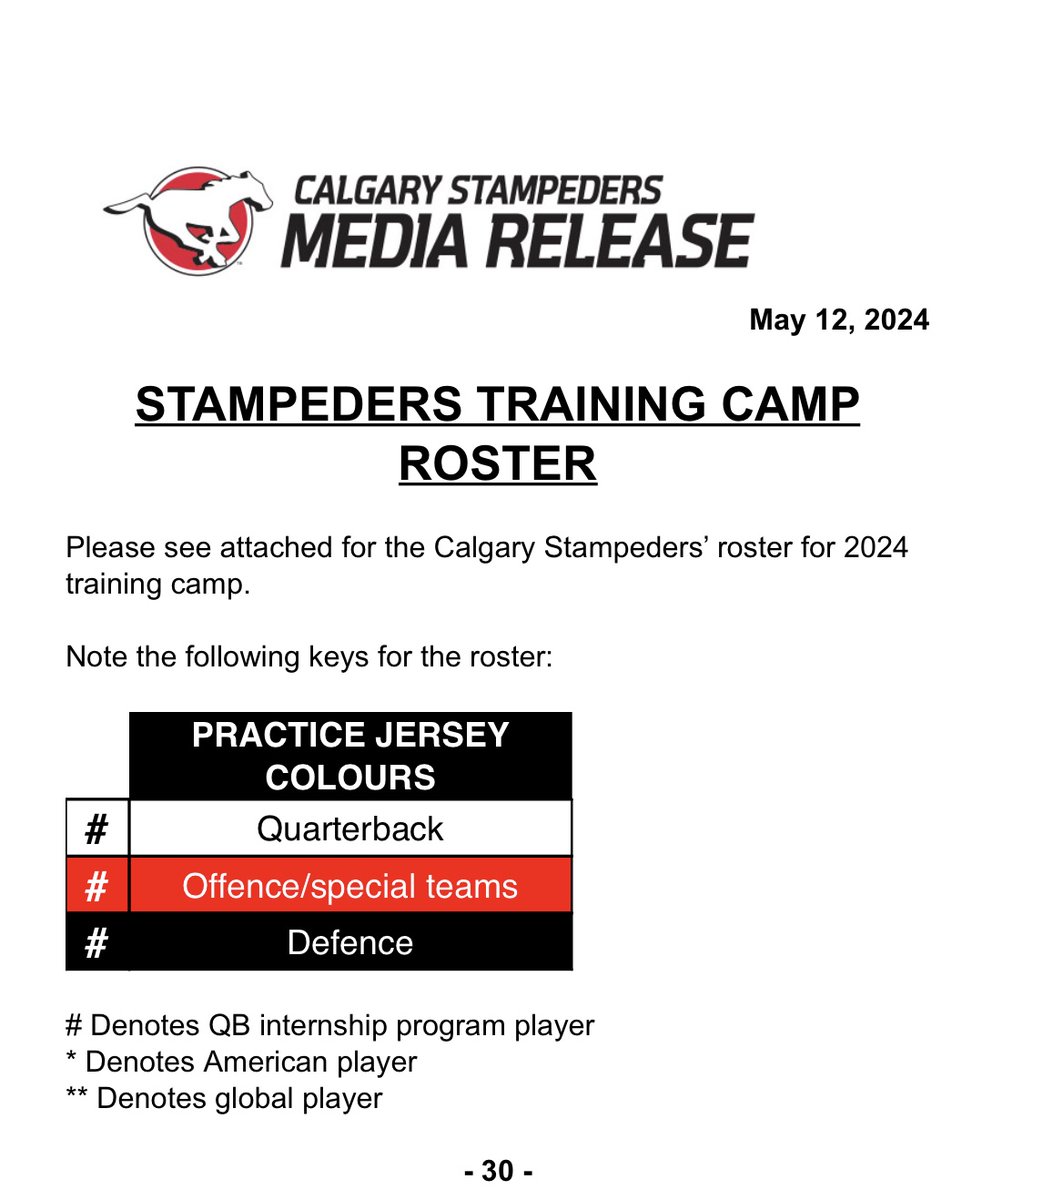 Here is the colour breakdown of jerseys for Stampeders training camp, to go with the roster I posted earlier.